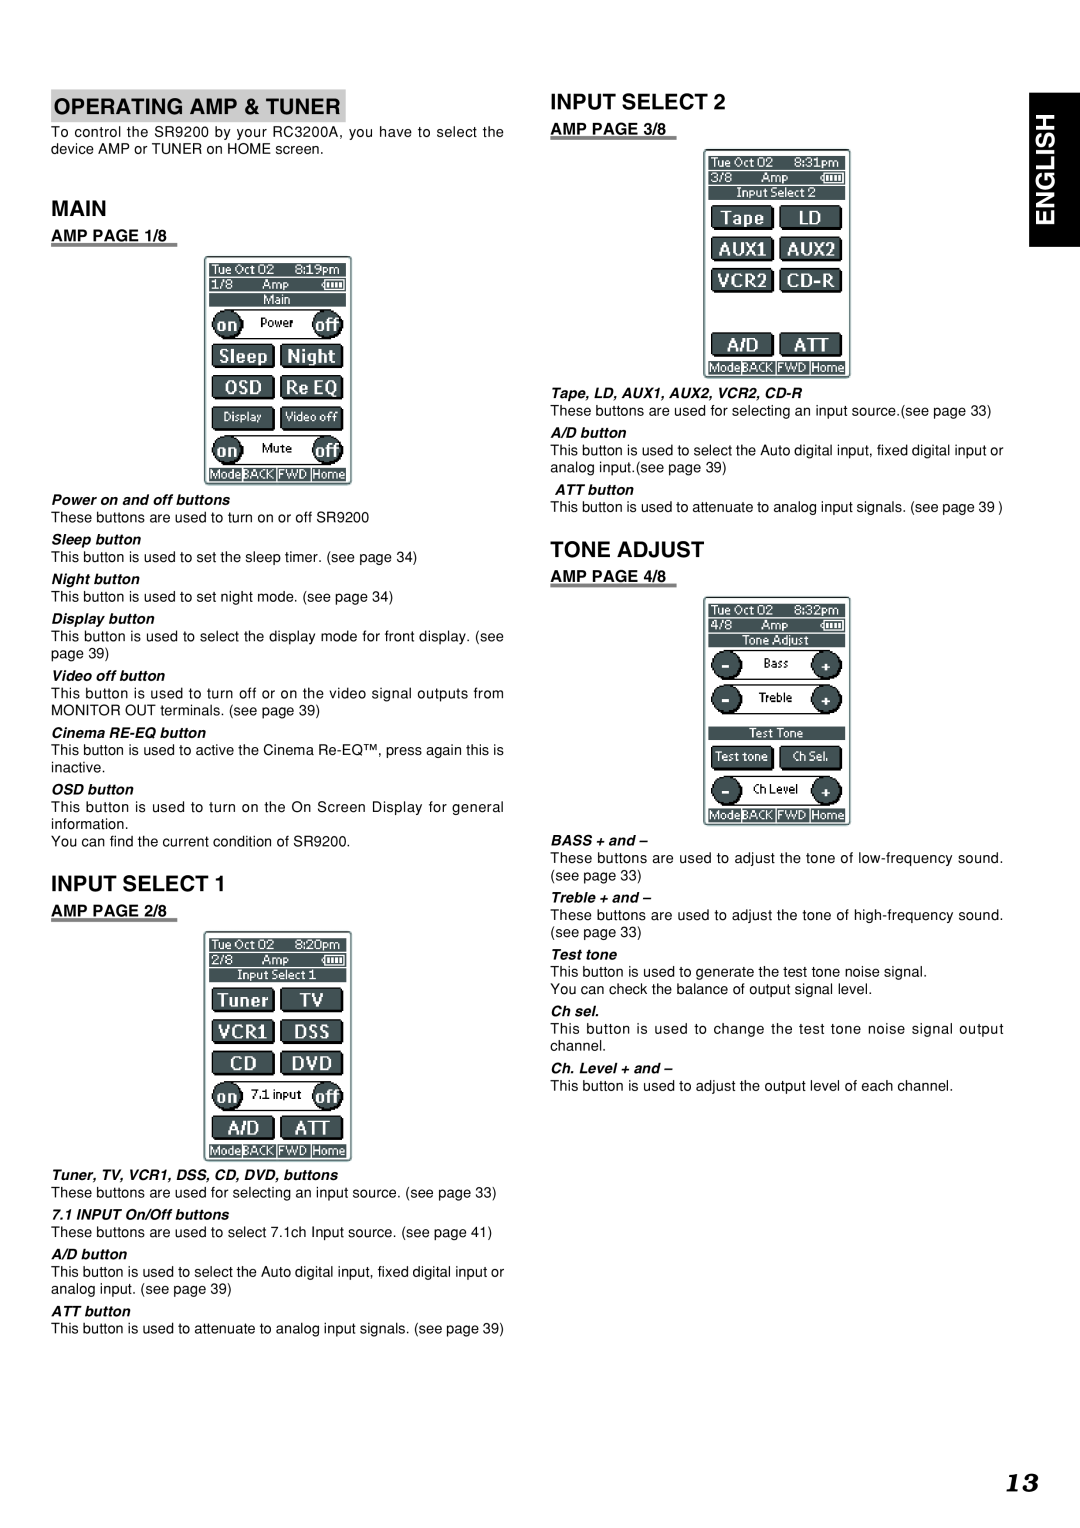 Marantz SR9200 English, AMP PAGE 1/8, AMP PAGE 3/8, AMP PAGE 2/8, AMP PAGE 4/8, Power on and off buttons, Sleep button 